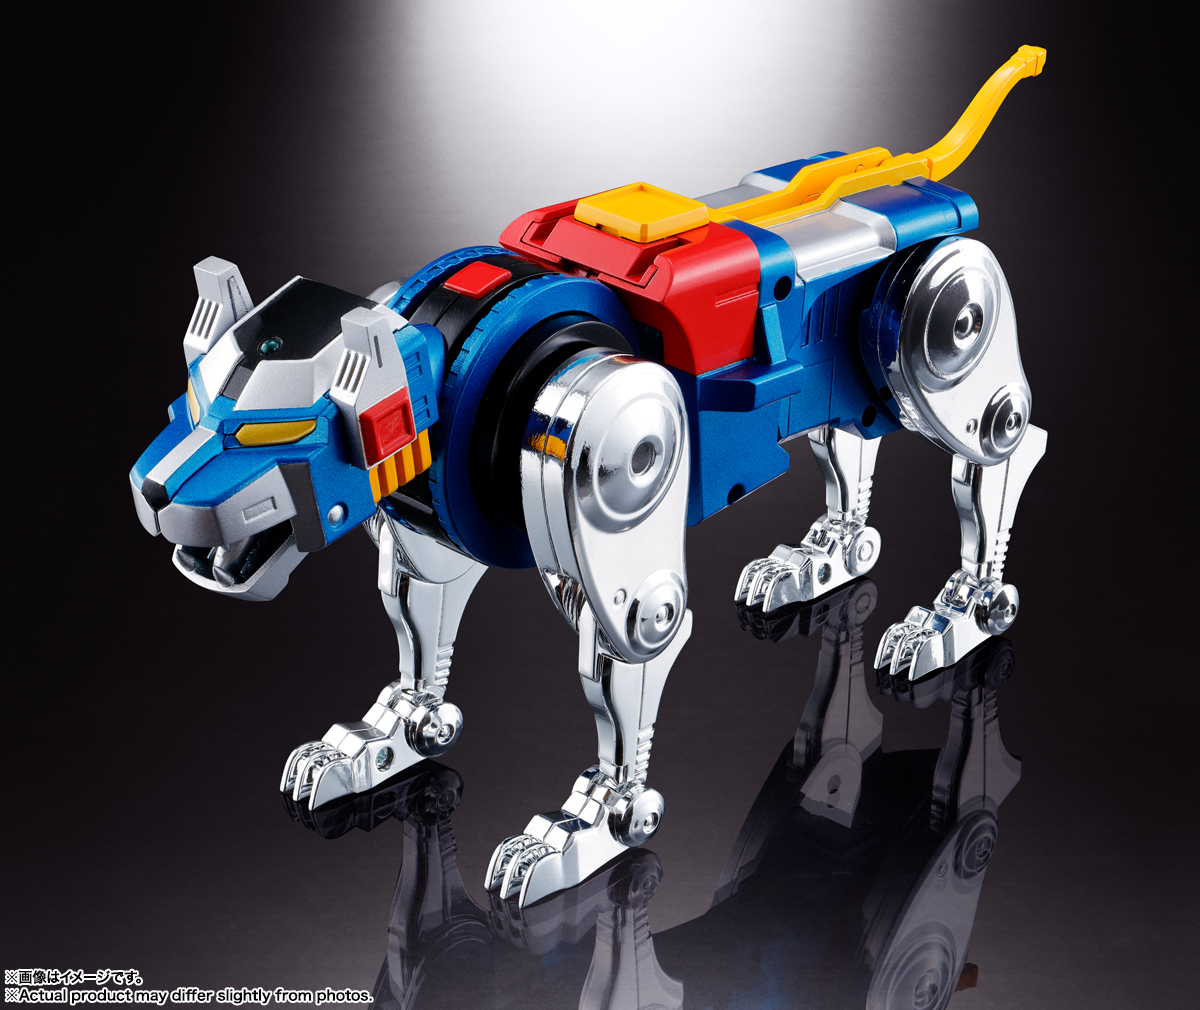 voltron-gx-71sp-voltron-chogokin-action-figure-50th-anniversary-ver image count 3